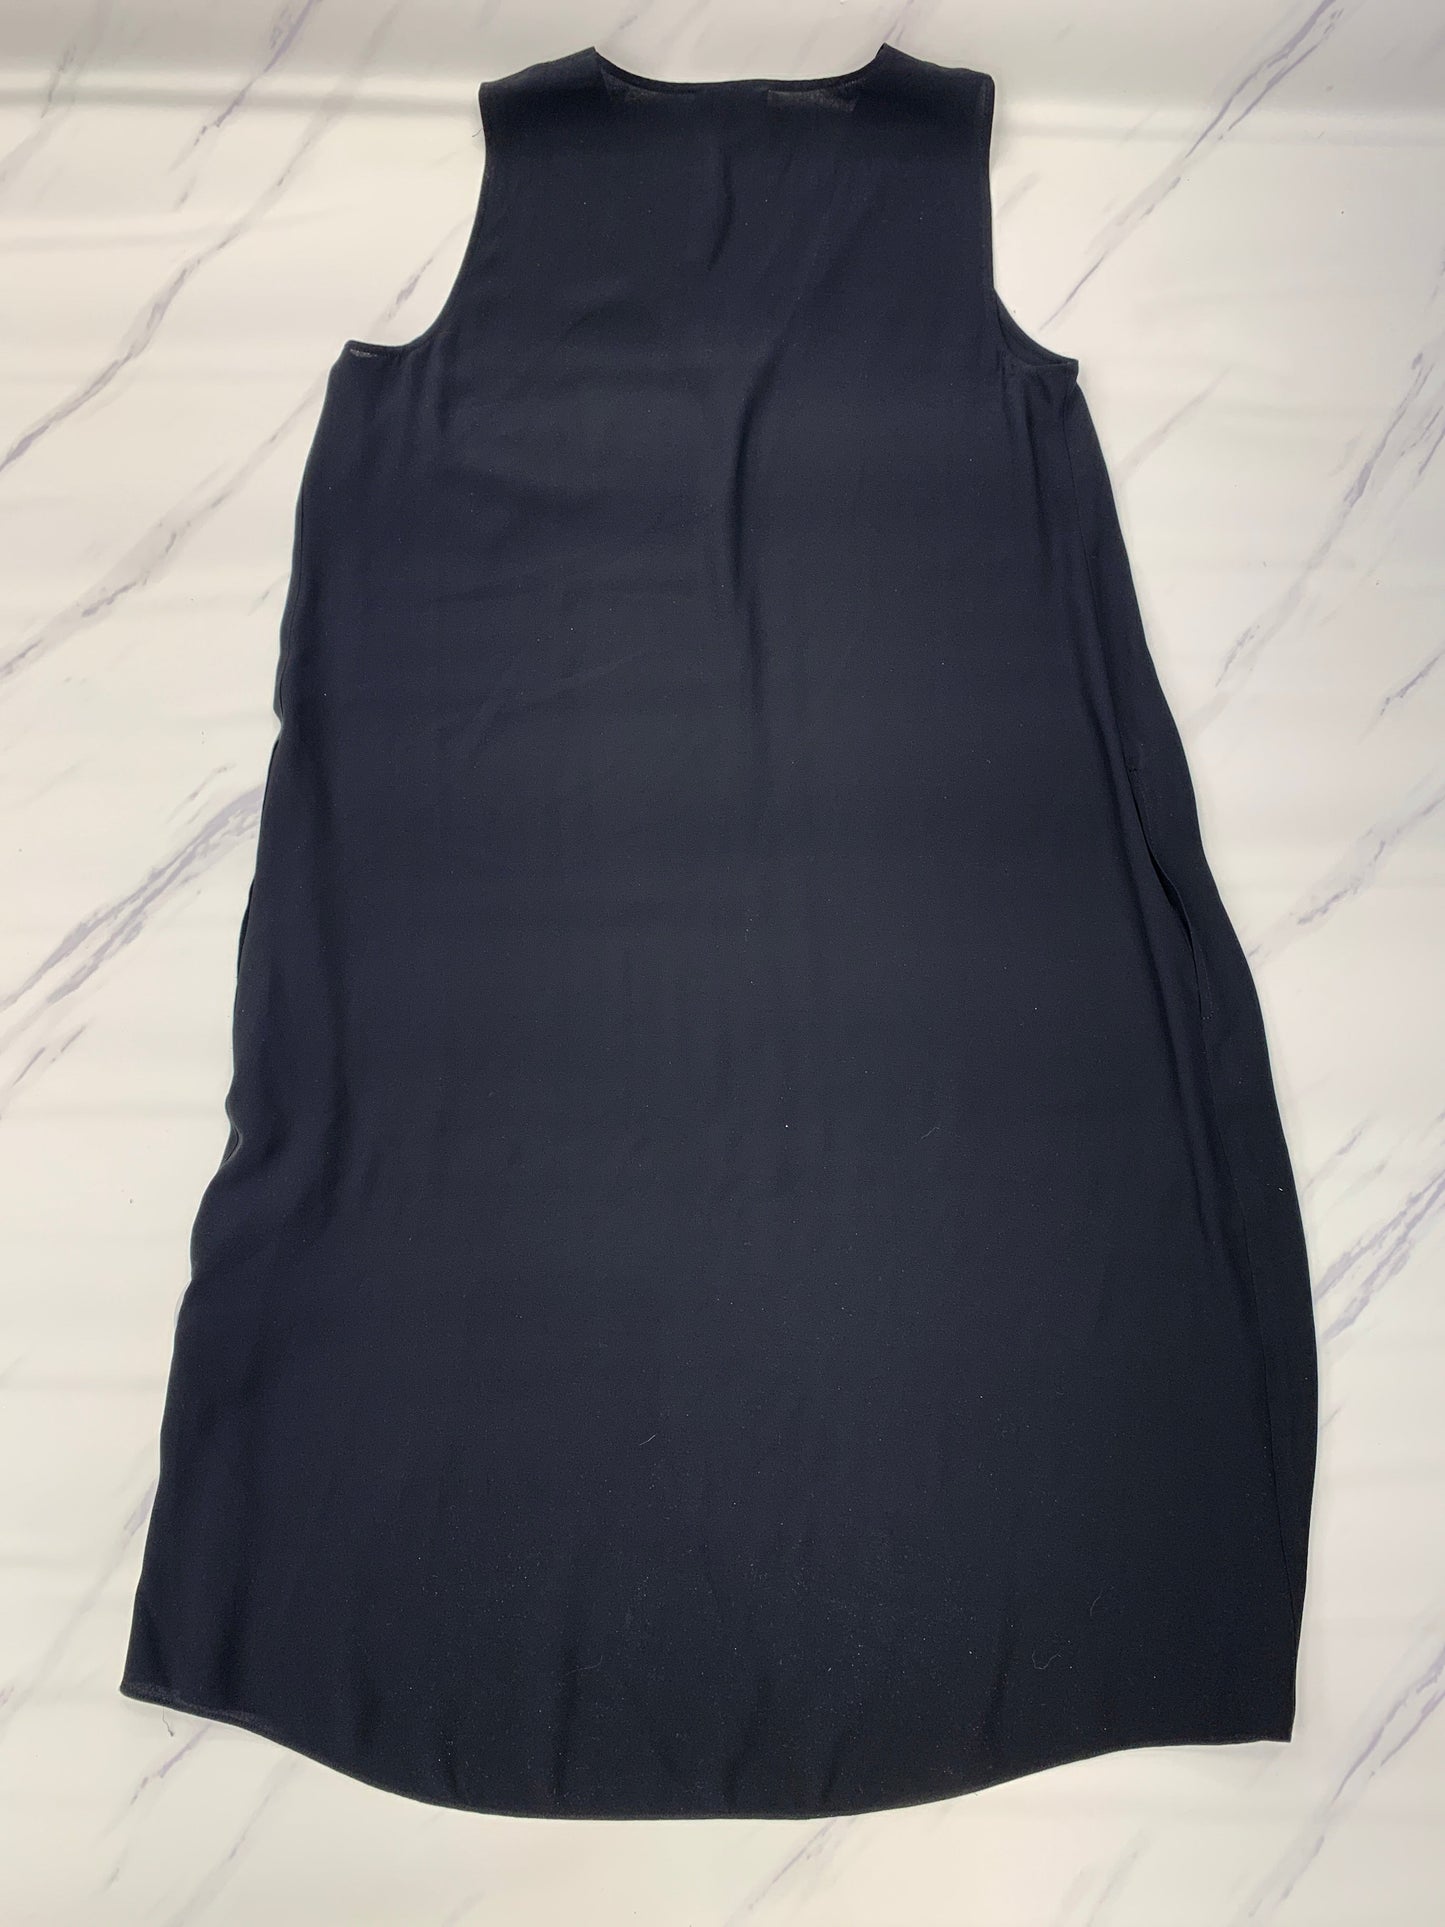 Black Dress Casual Maxi Eileen Fisher, Size M